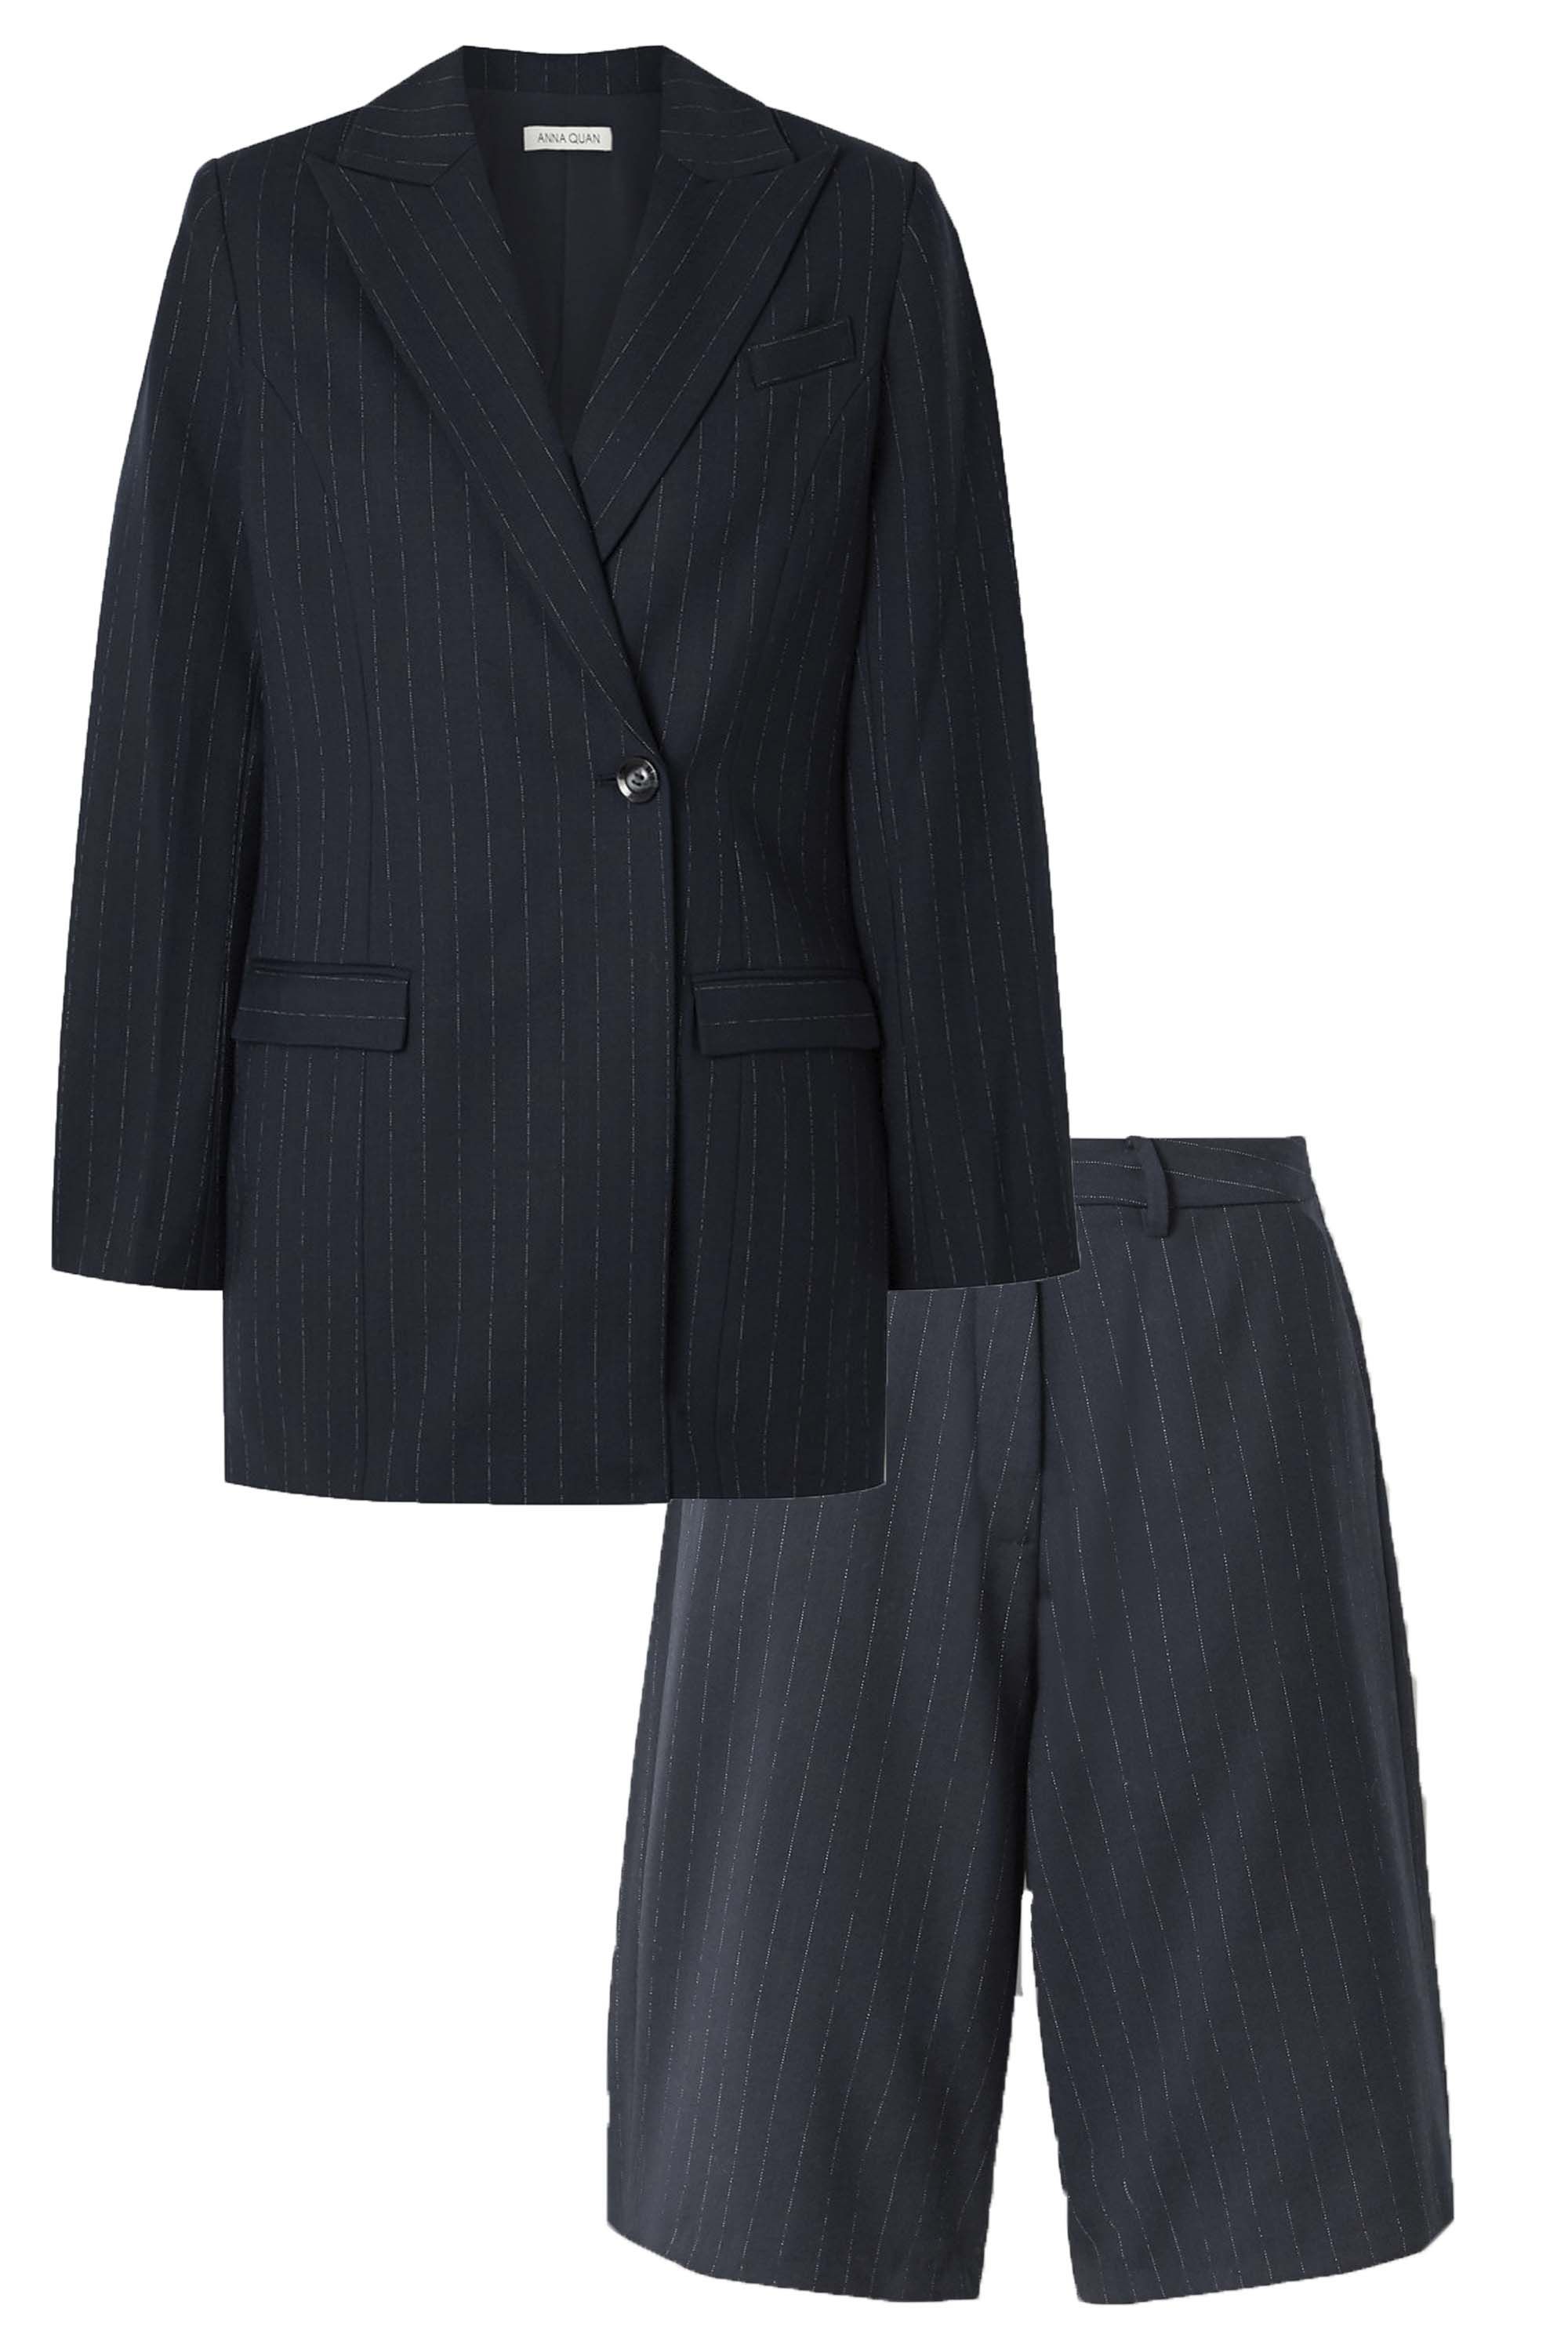 Why the Short Suit Should Be Your Next Spring Investment